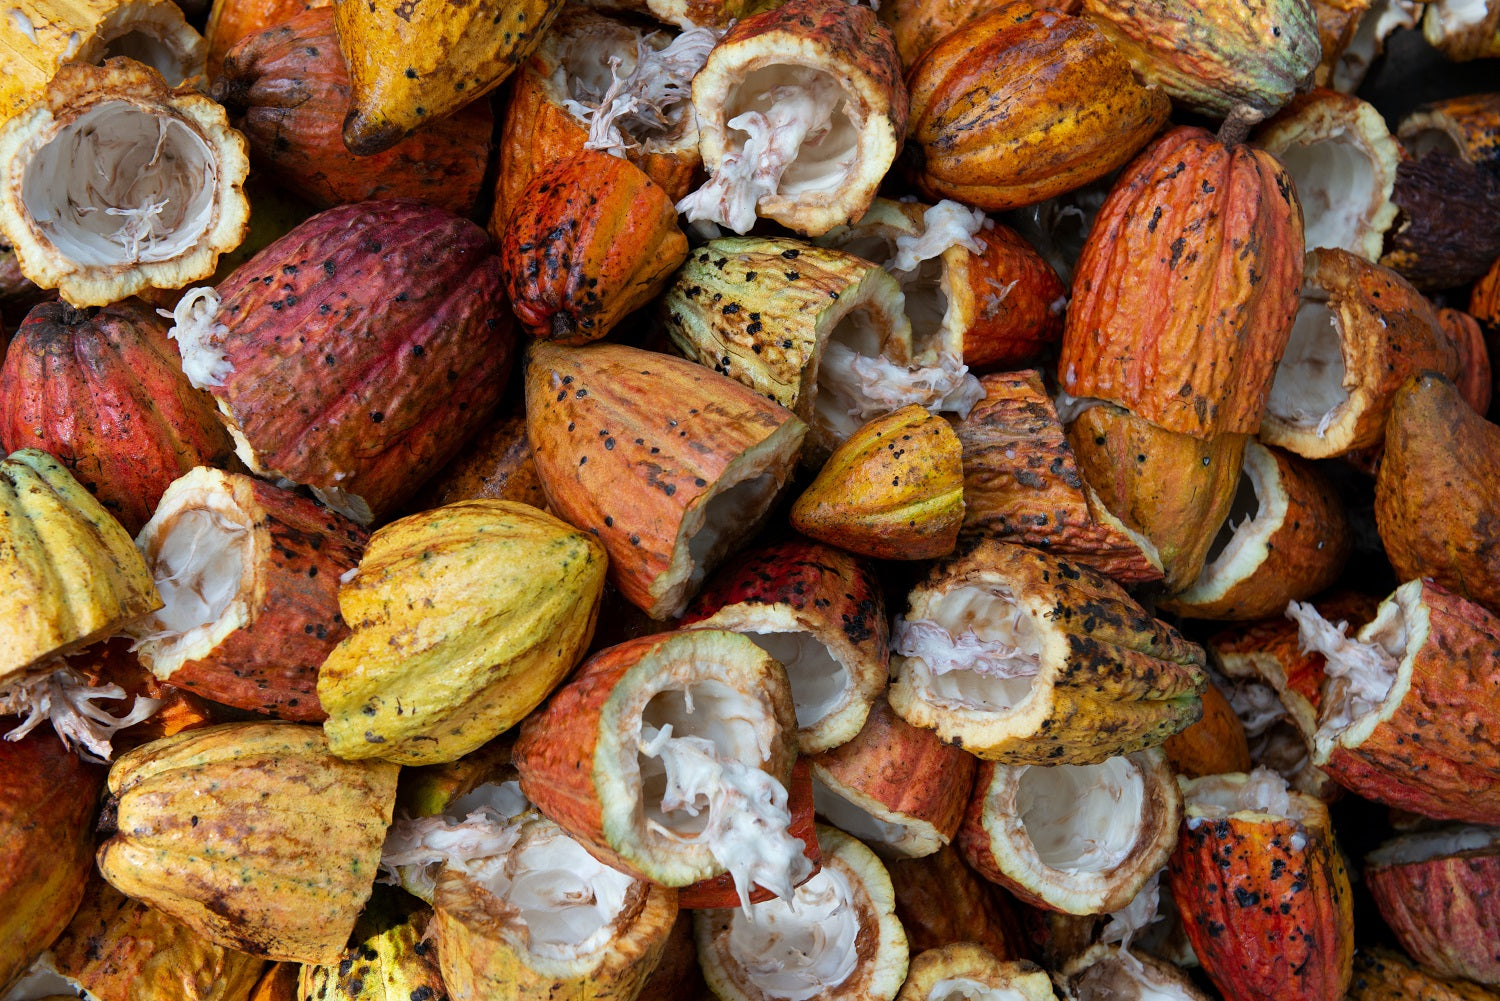 7 Health Benefits of Cacao